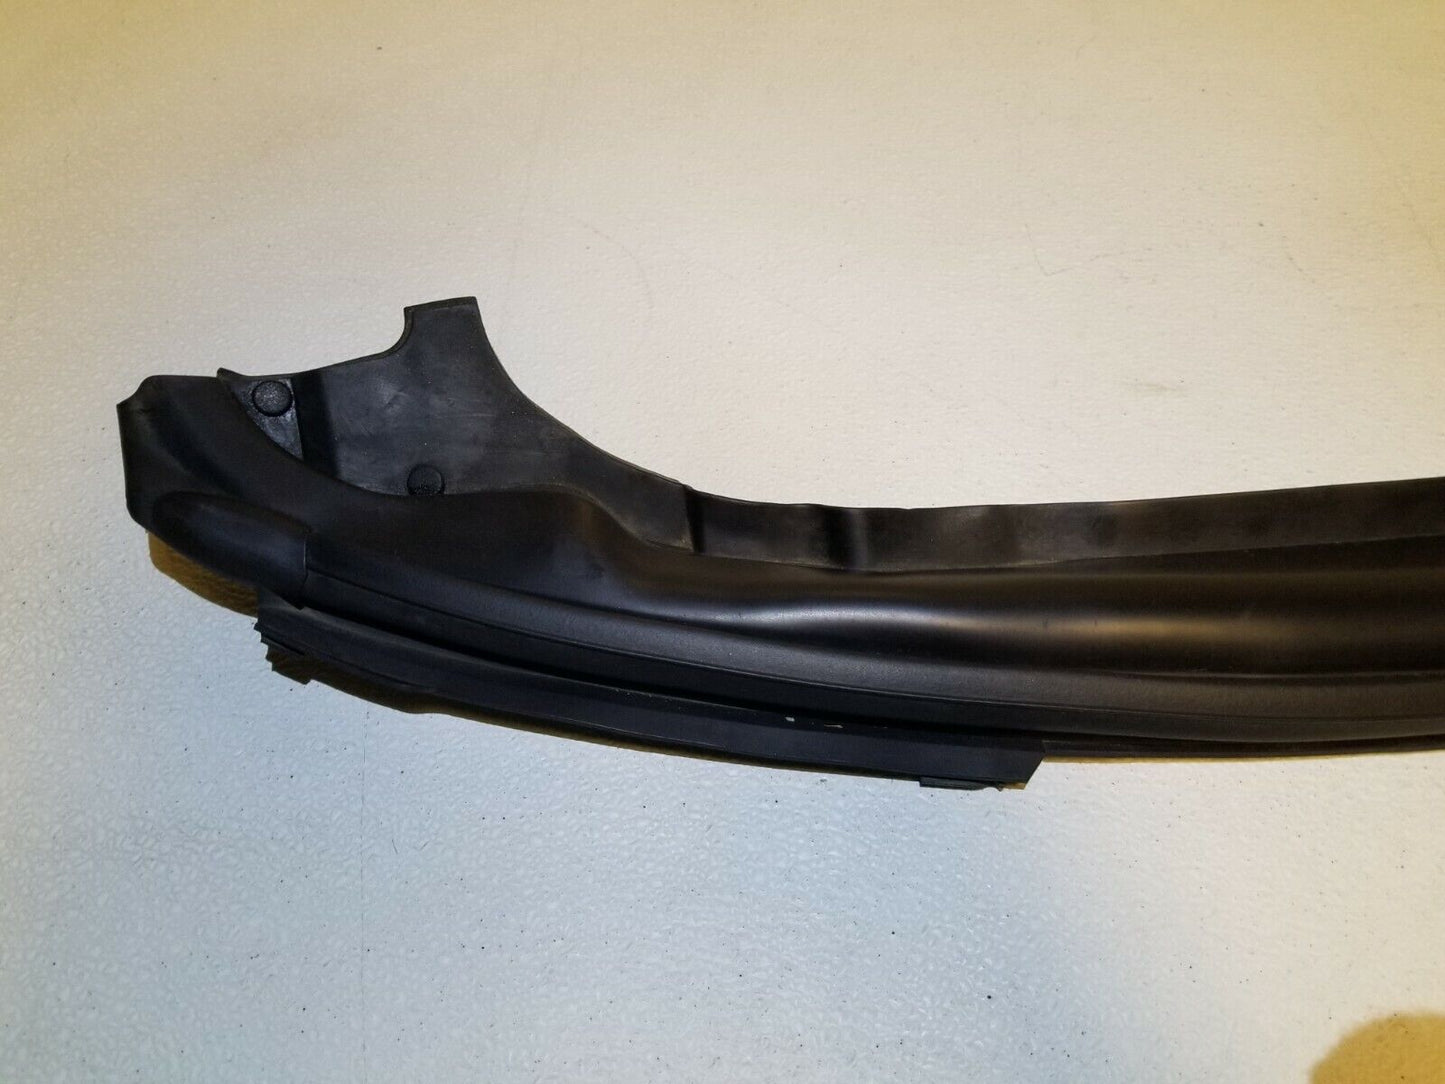 10 11 12 13 Infiniti G37 Coupe Left Driver Side Fender Rubber Seal Cover OEM